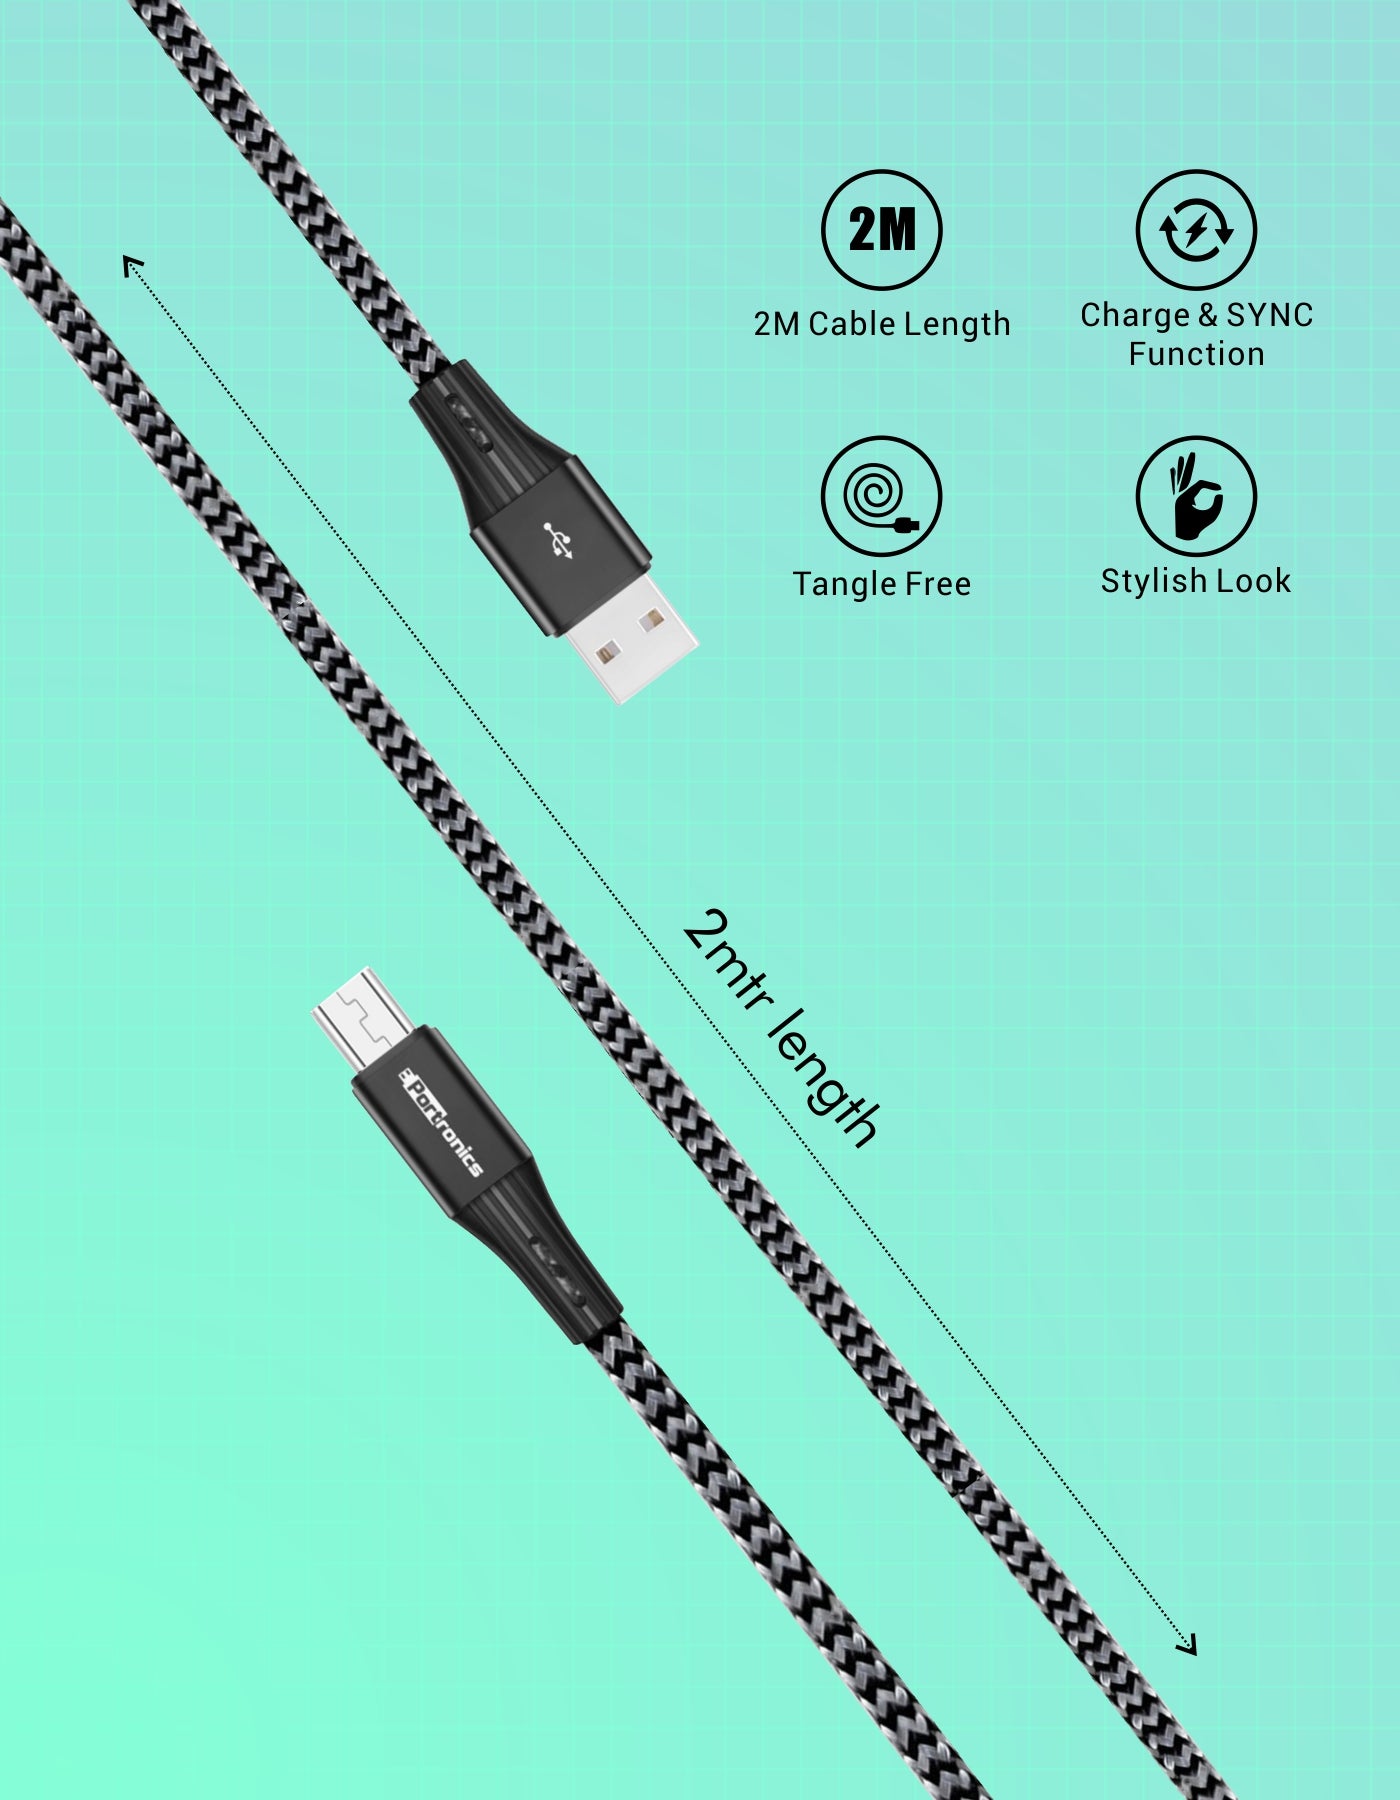 Portronics Konnect A 2M Micro USB Cable For Fast Charging